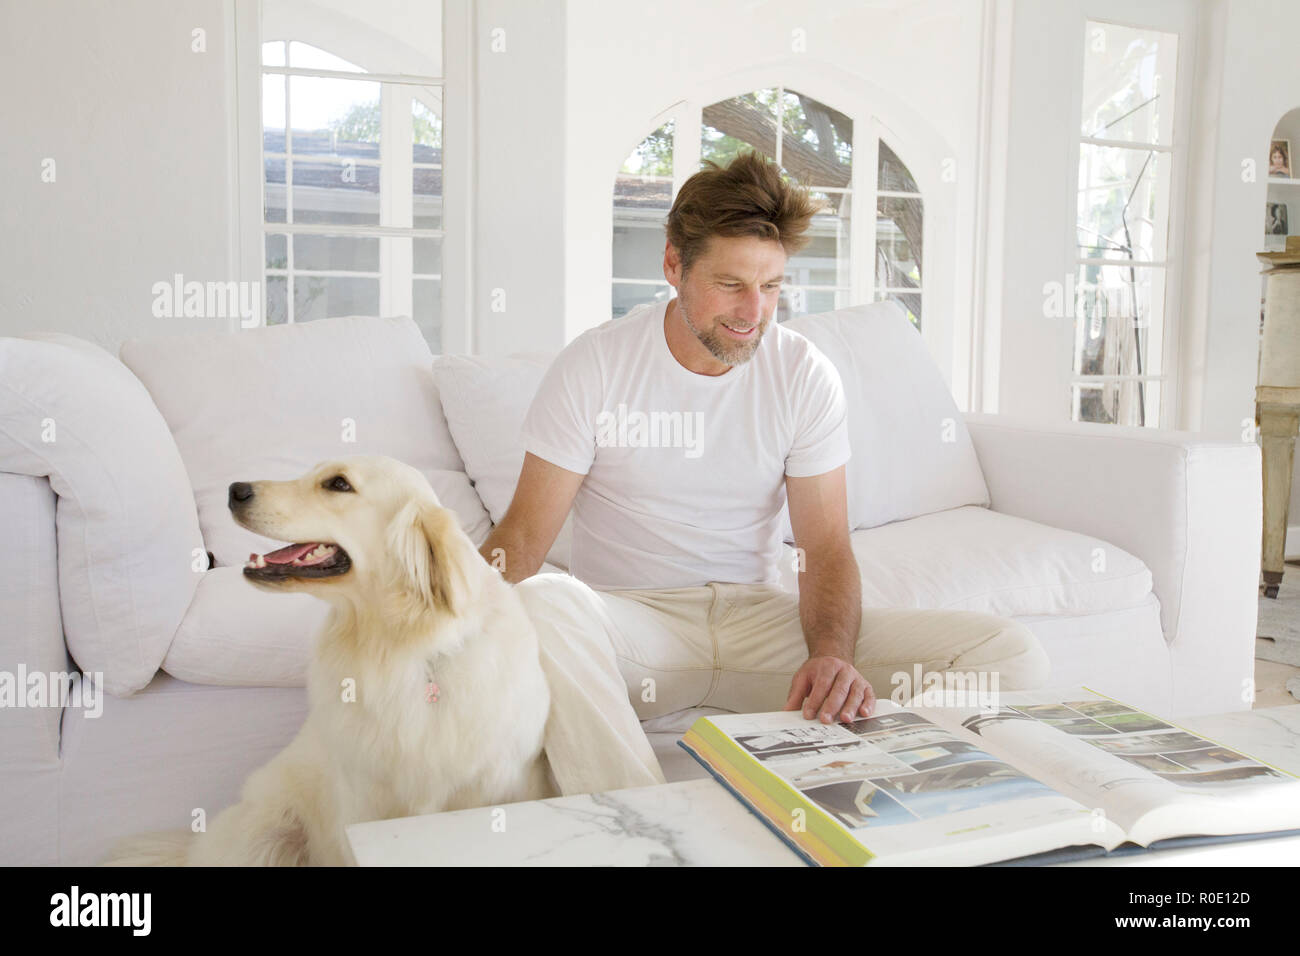 Mid-Adult Man Reading Large Book in Living Room while Petting Pet Dog I Stock Photo